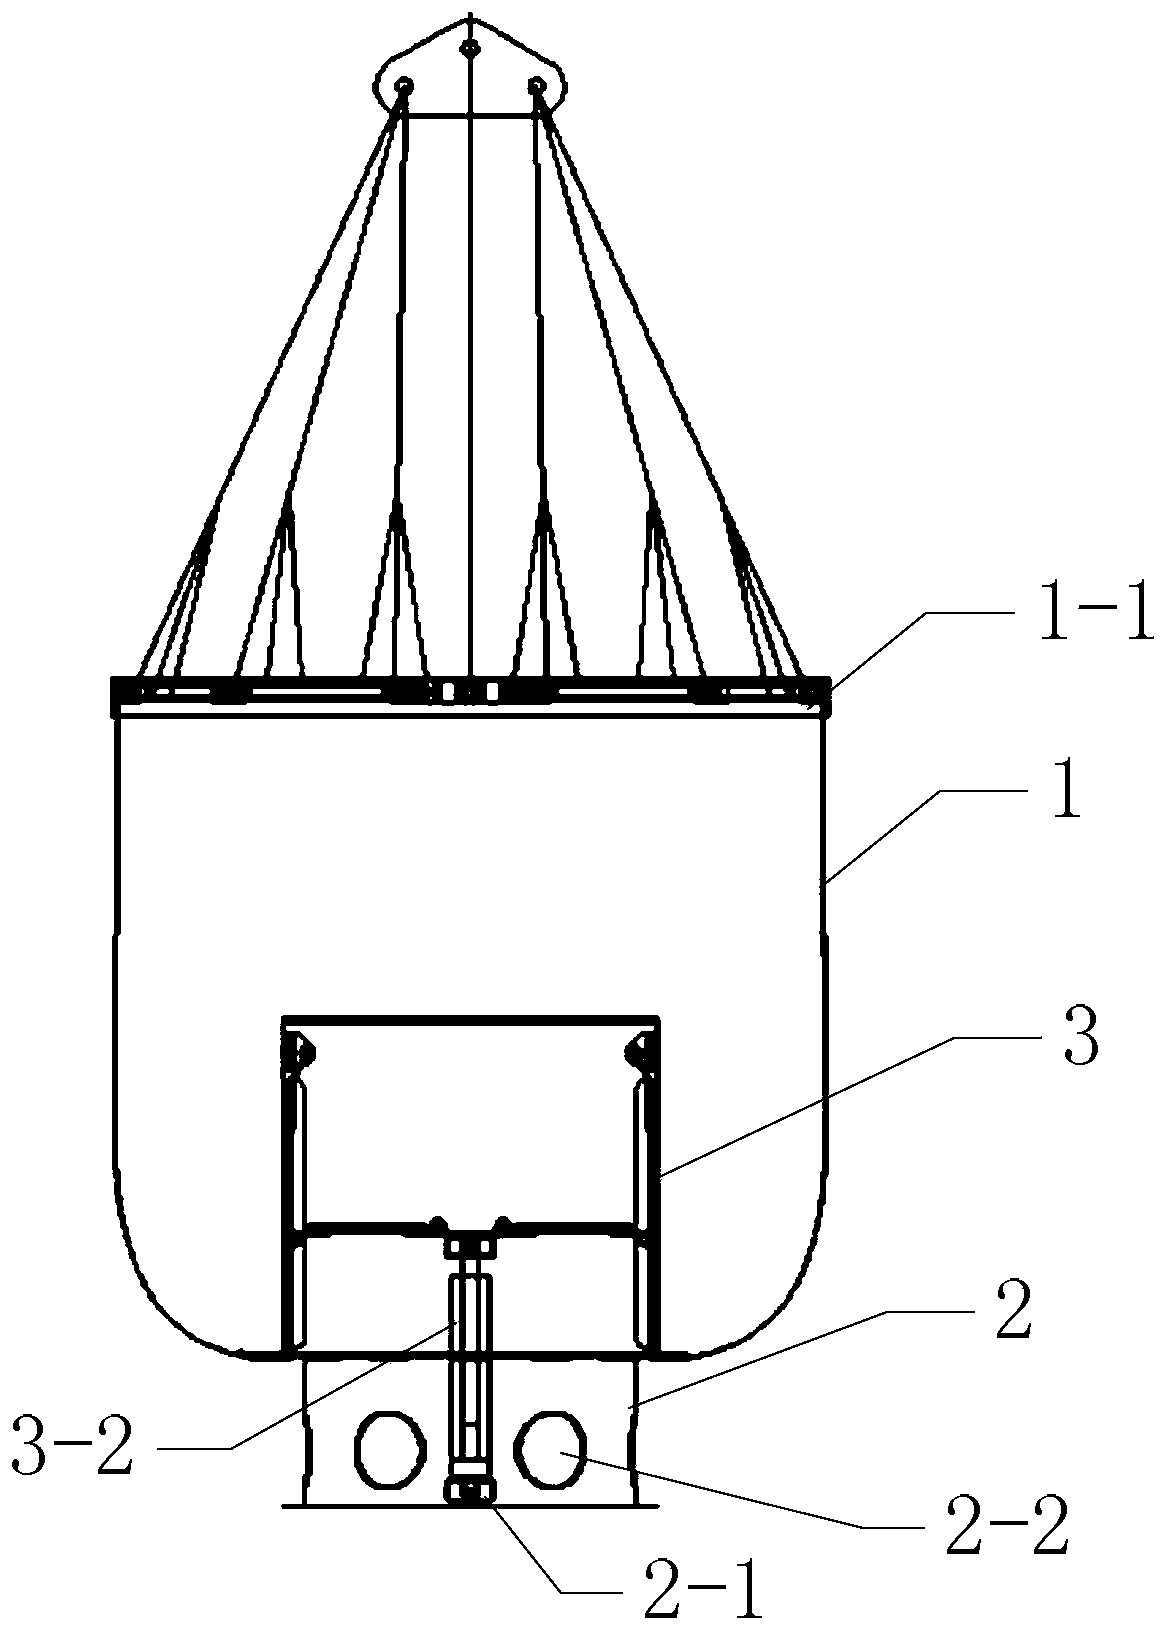 Fire extinguishment spraying device applied to aircraft